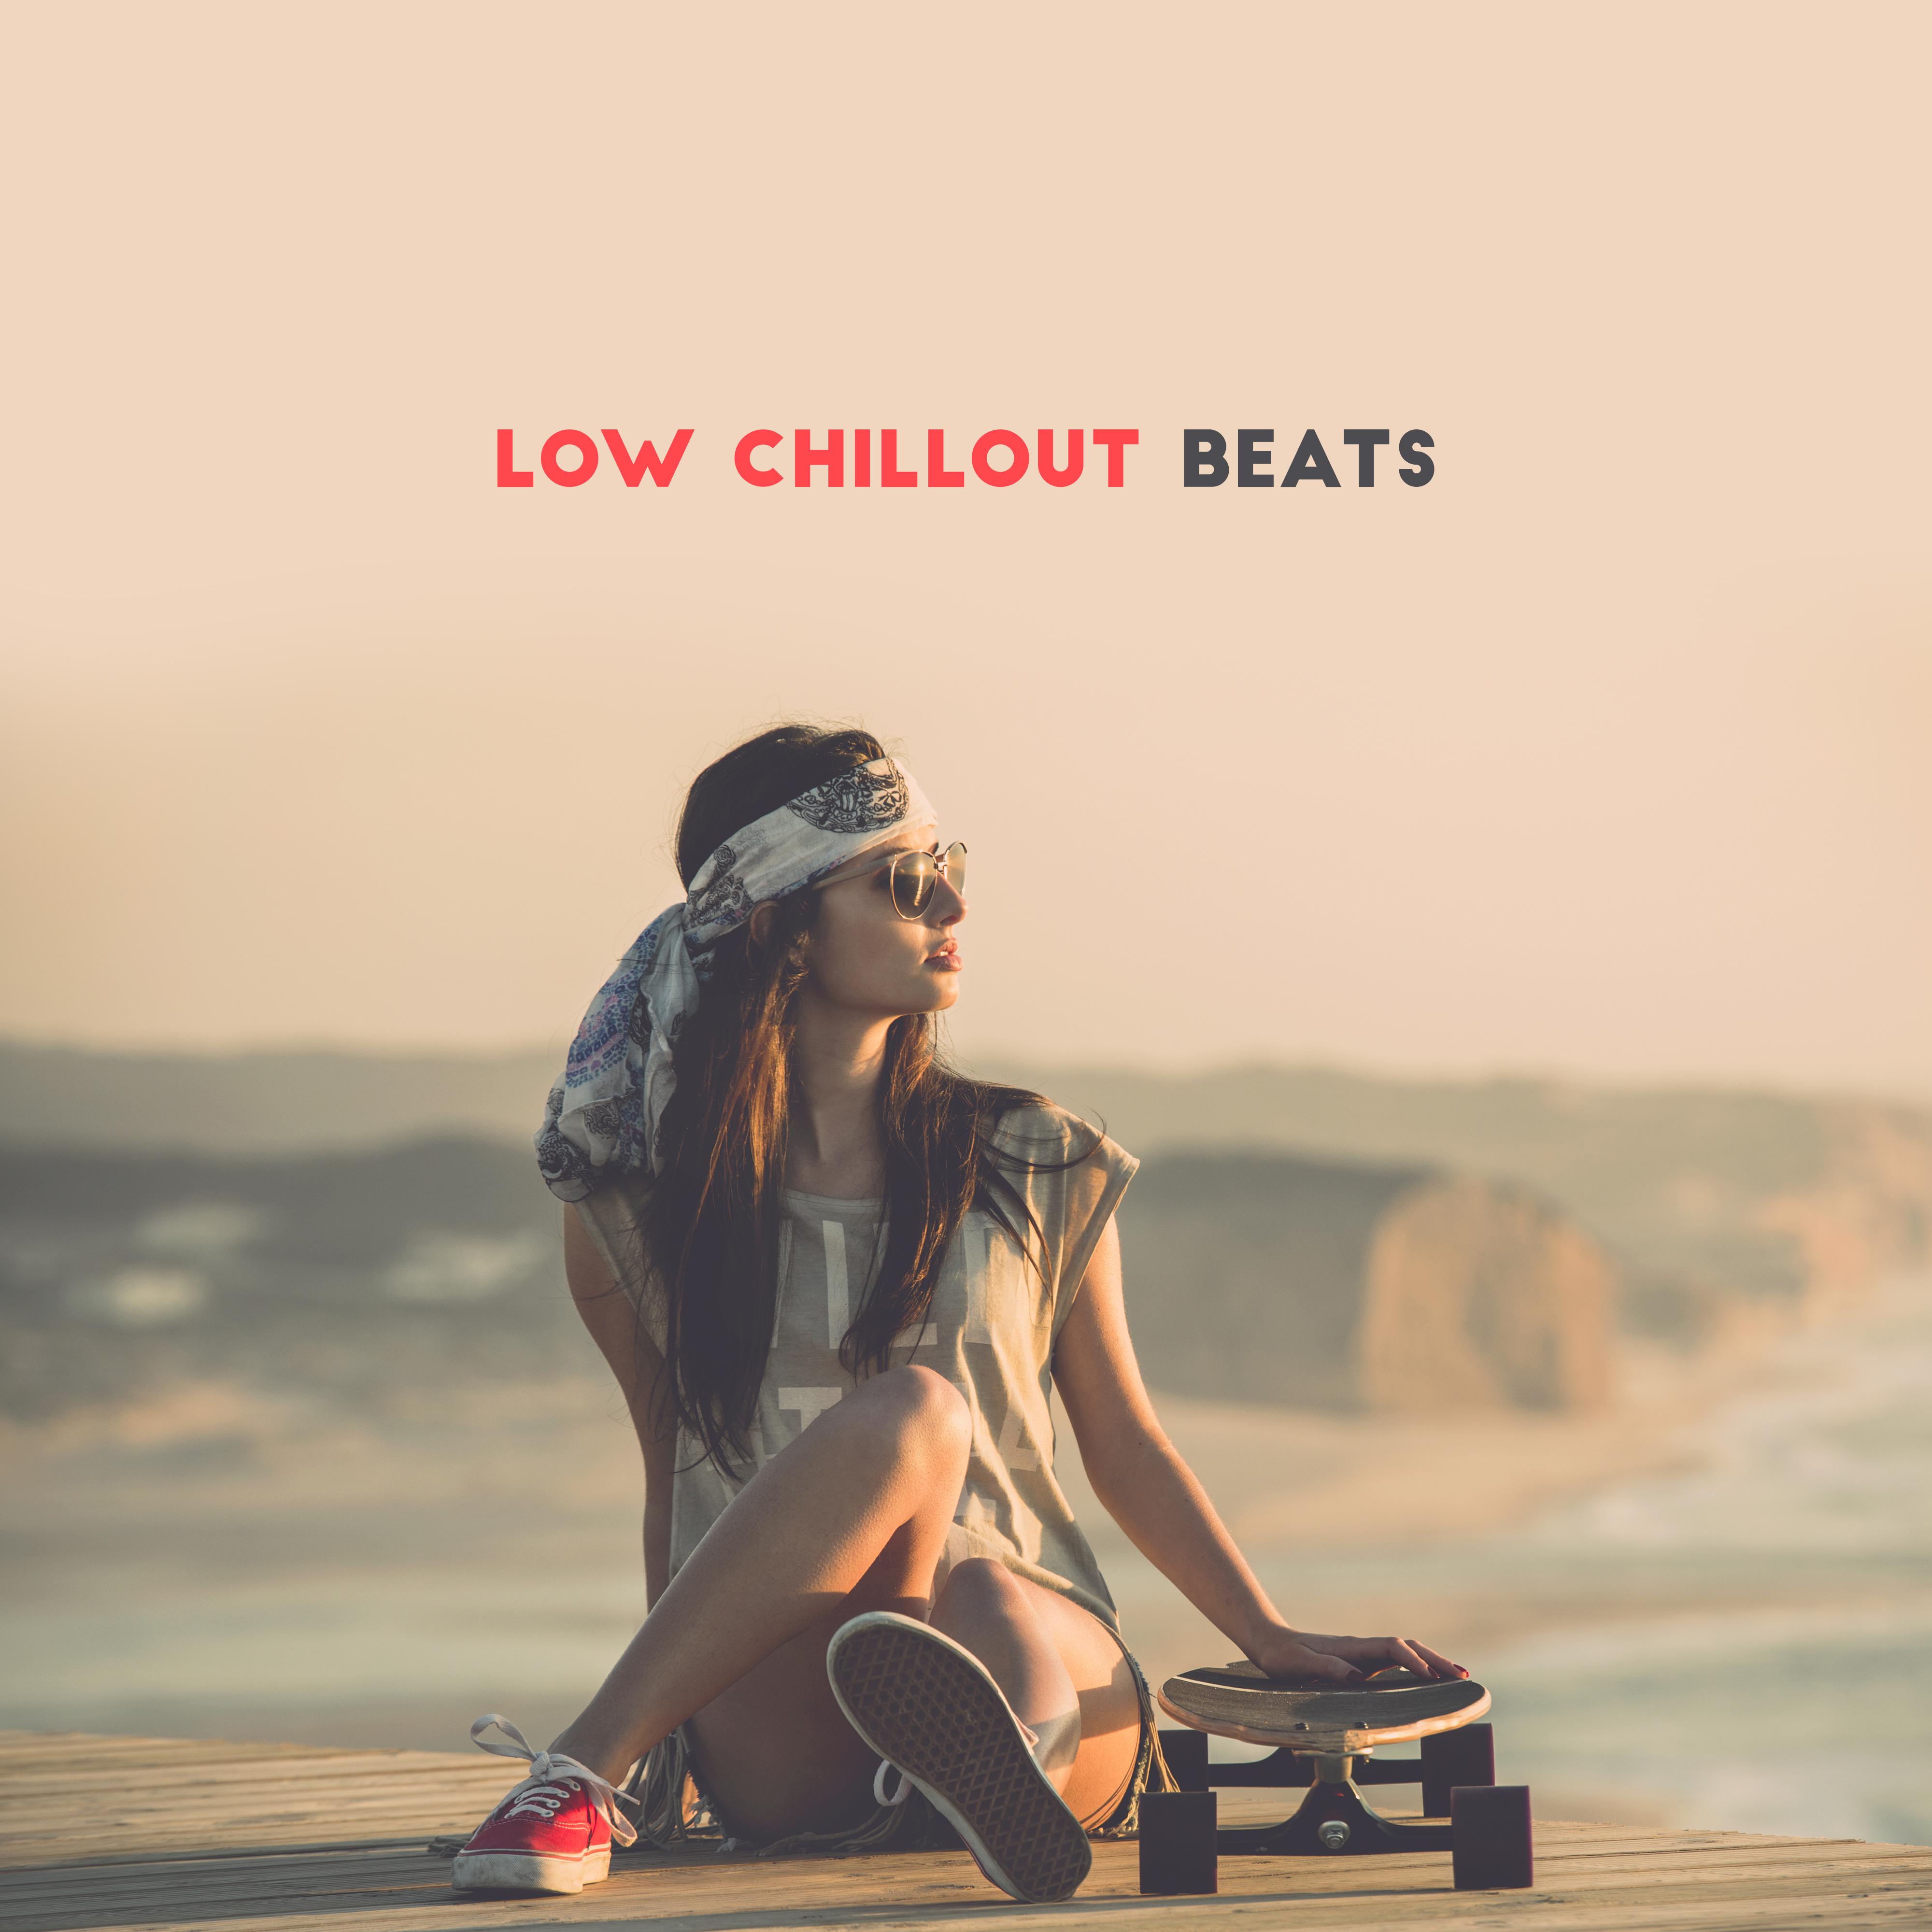 Low Chillout Beats: The Deepest House Rhythms 2019